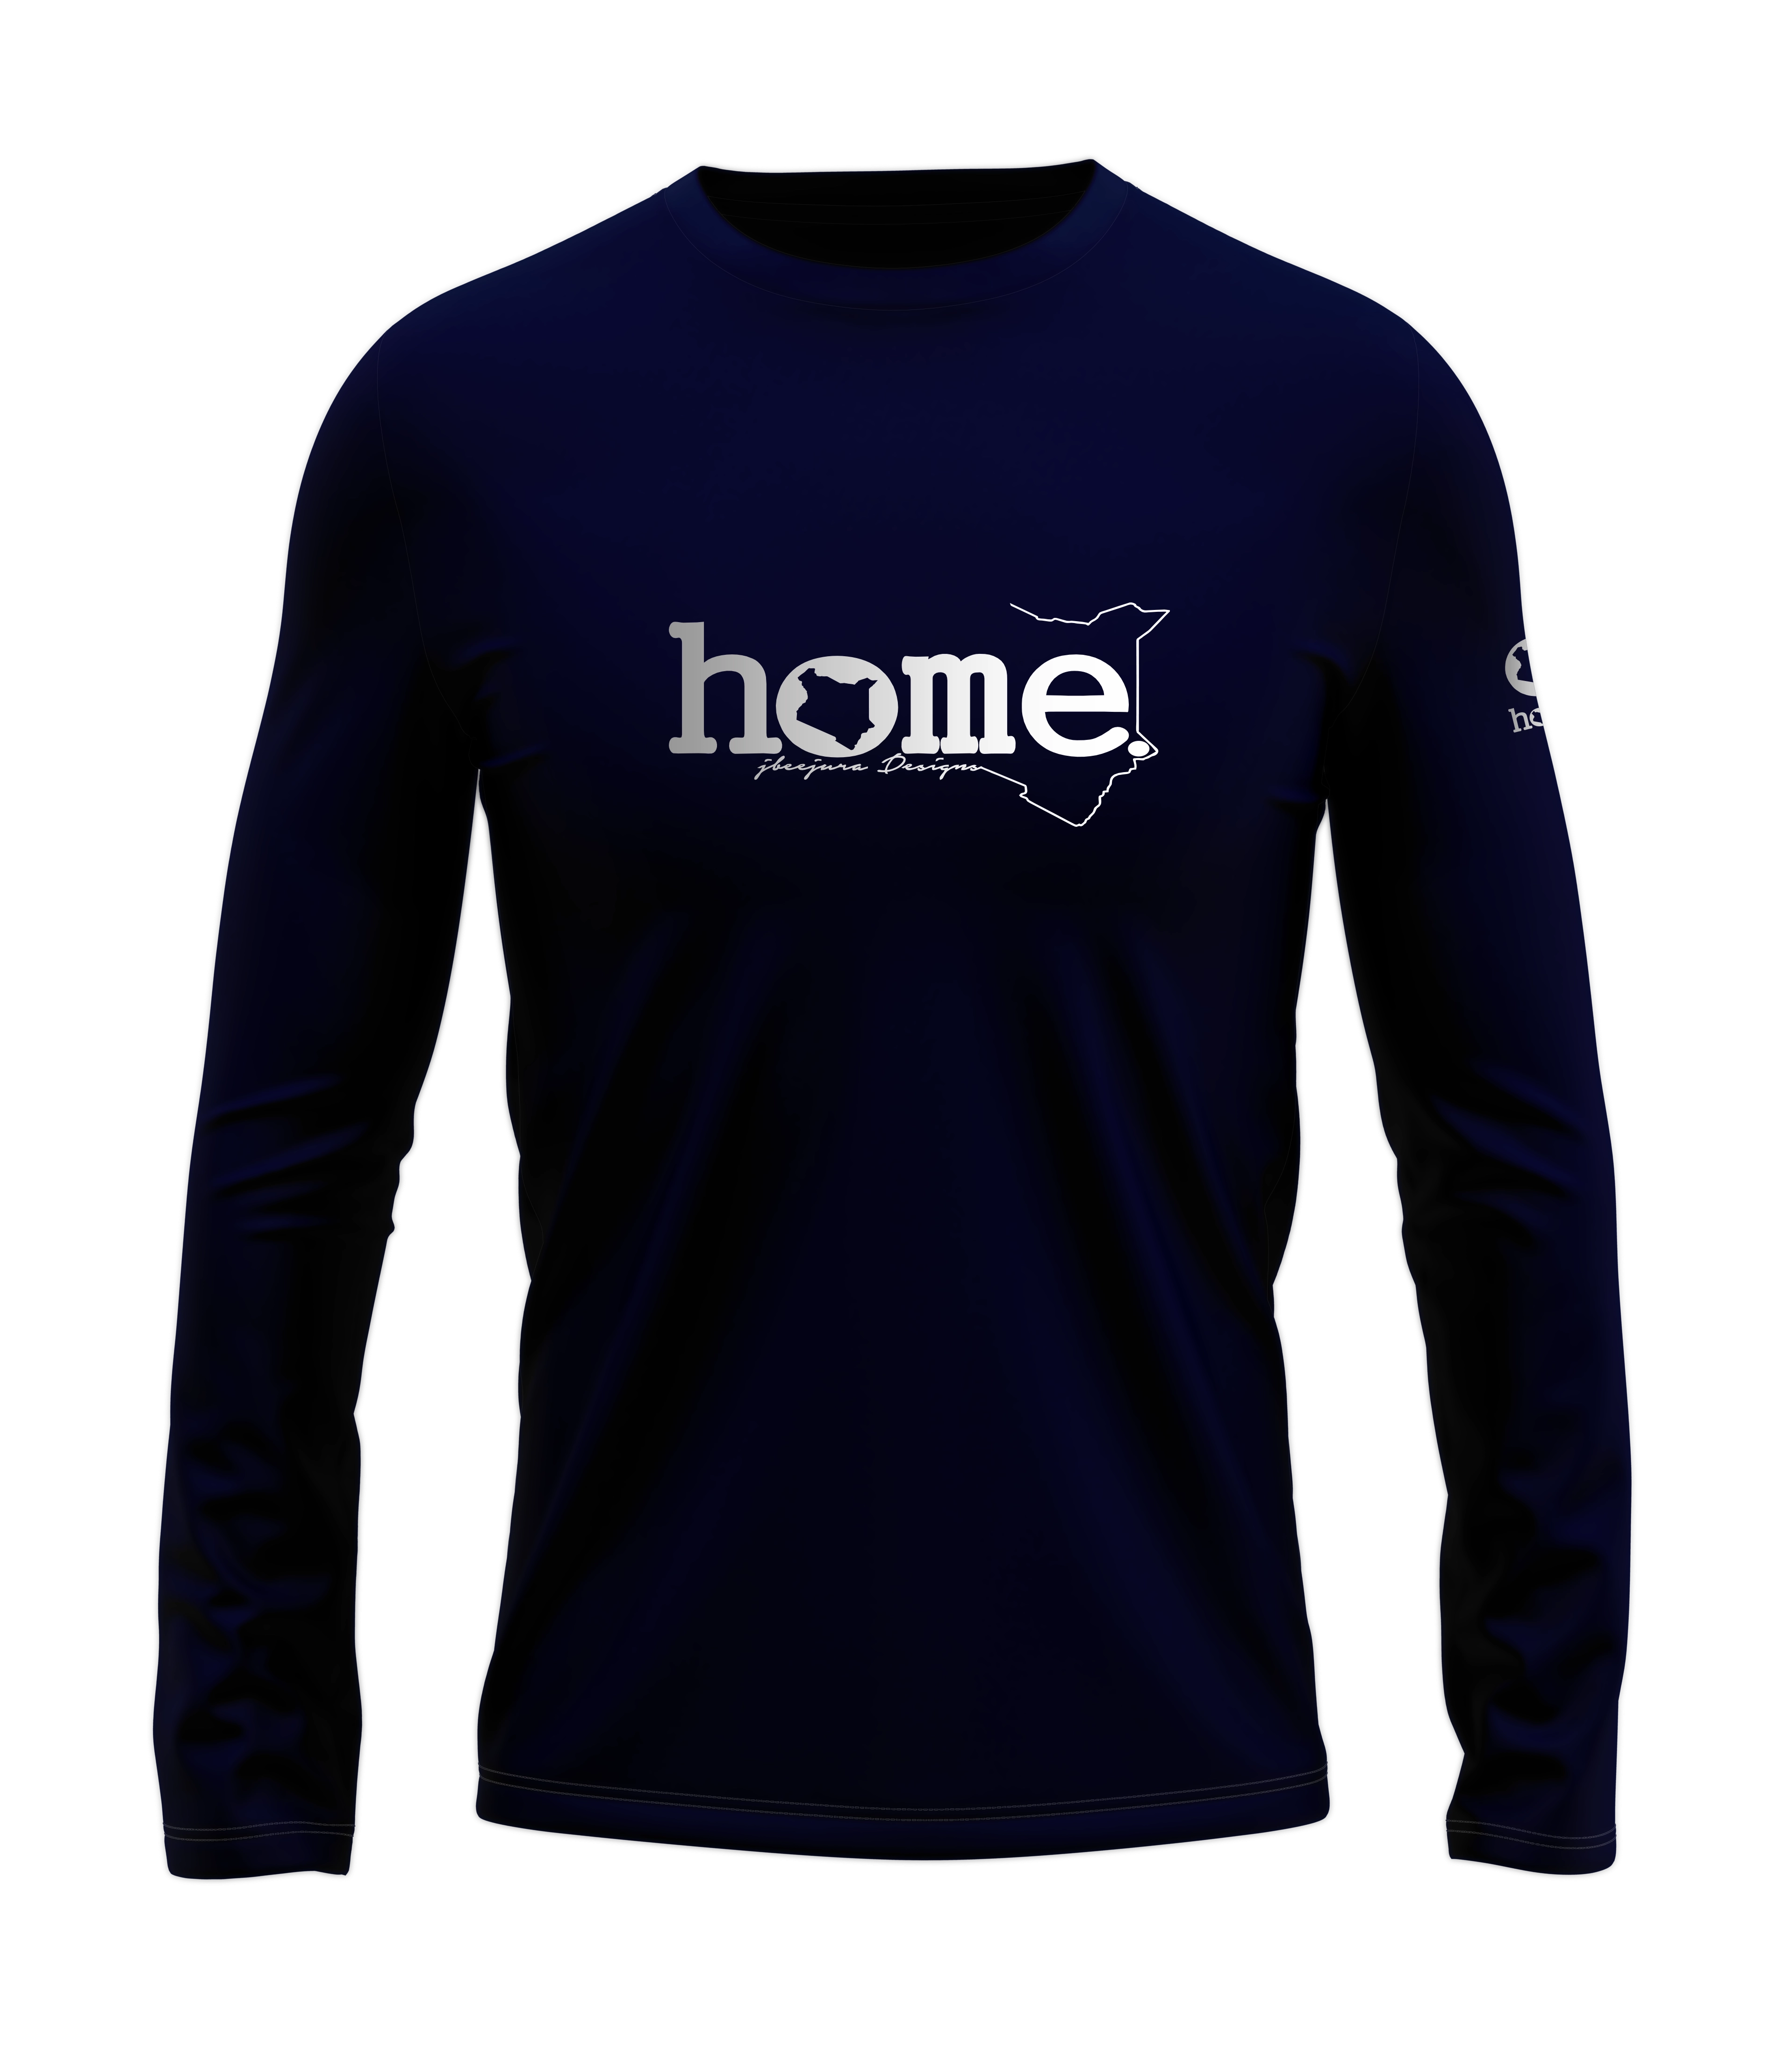 home_254 LONG-SLEEVED NAVY BLUE T-SHIRT WITH A SILVER CLASSIC WORDS PRINT – COTTON PLUS FABRIC